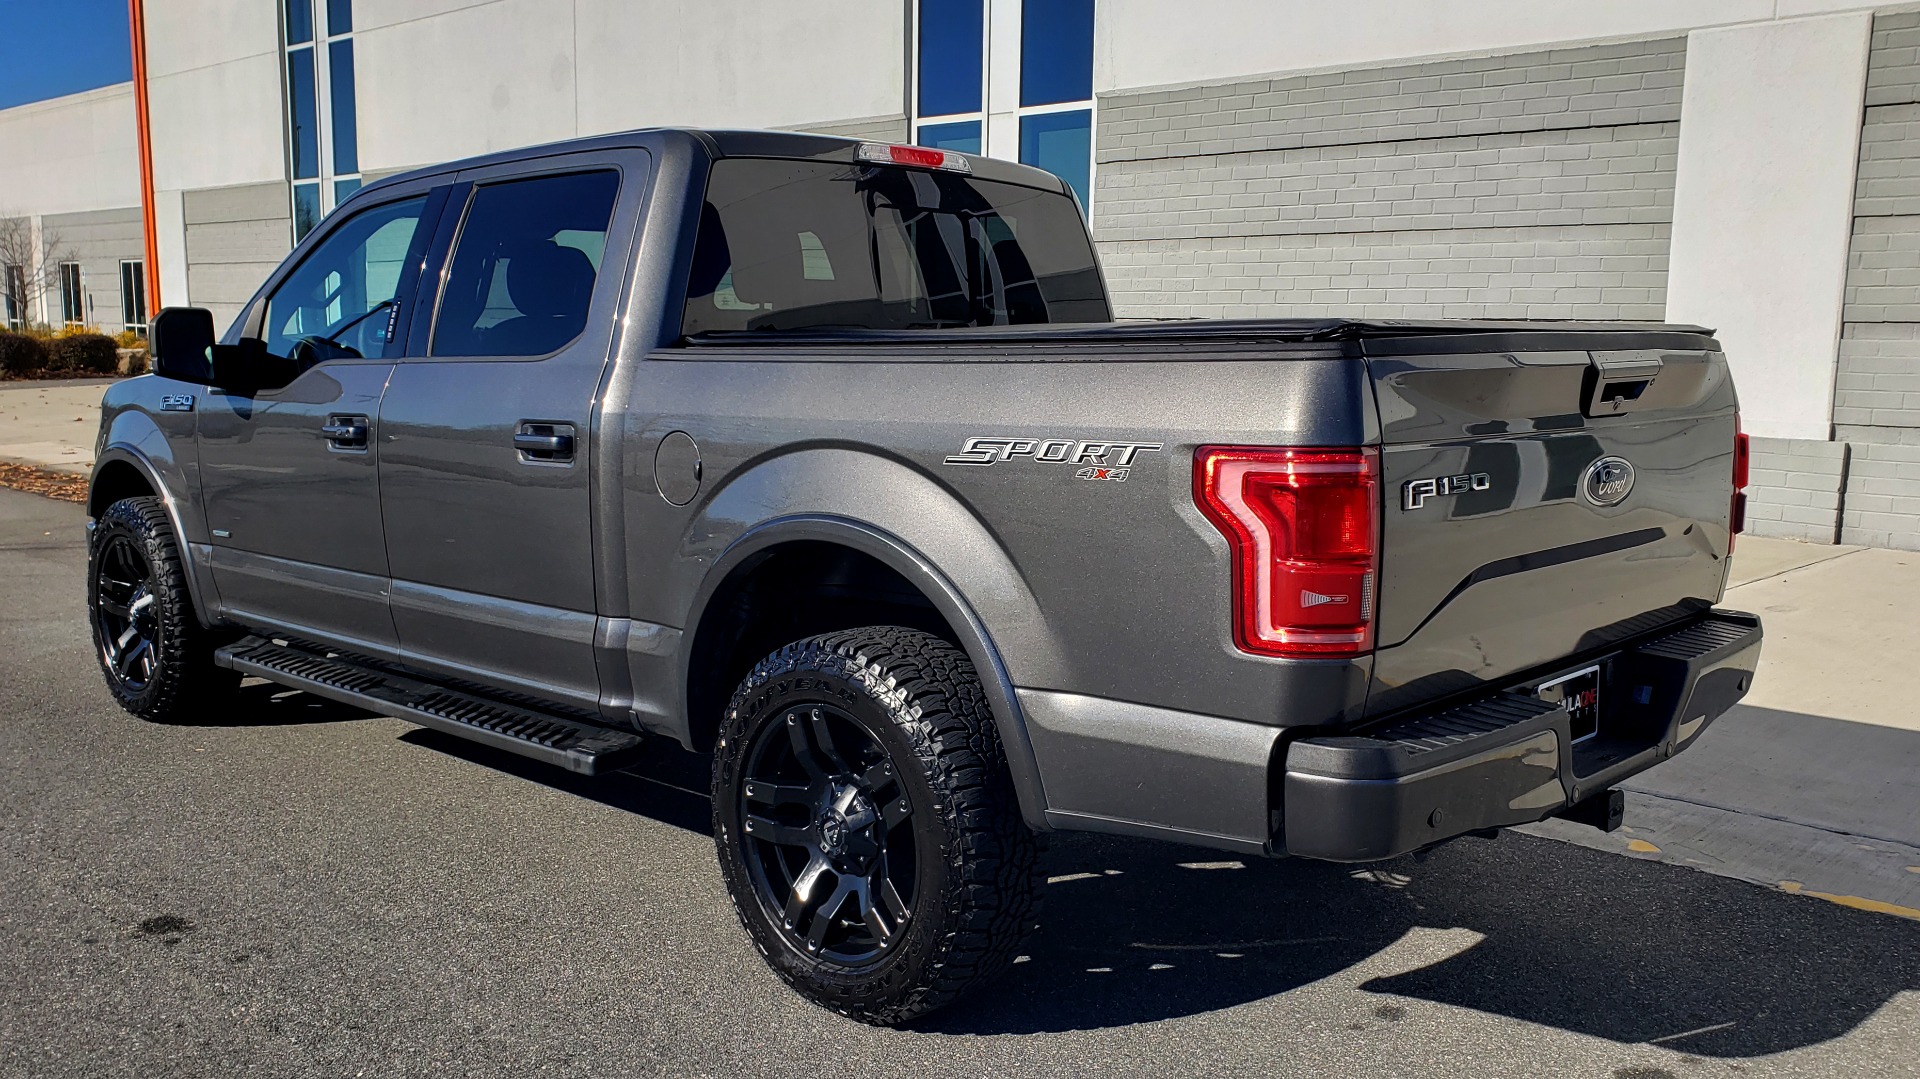 Used 2017 Ford F-150 LARIAT 4X4 SUPERCREW / 3.5L ECOBOOST / 10-SPD AUTO / NAV / SONY / REARVIEW for sale Sold at Formula Imports in Charlotte NC 28227 5